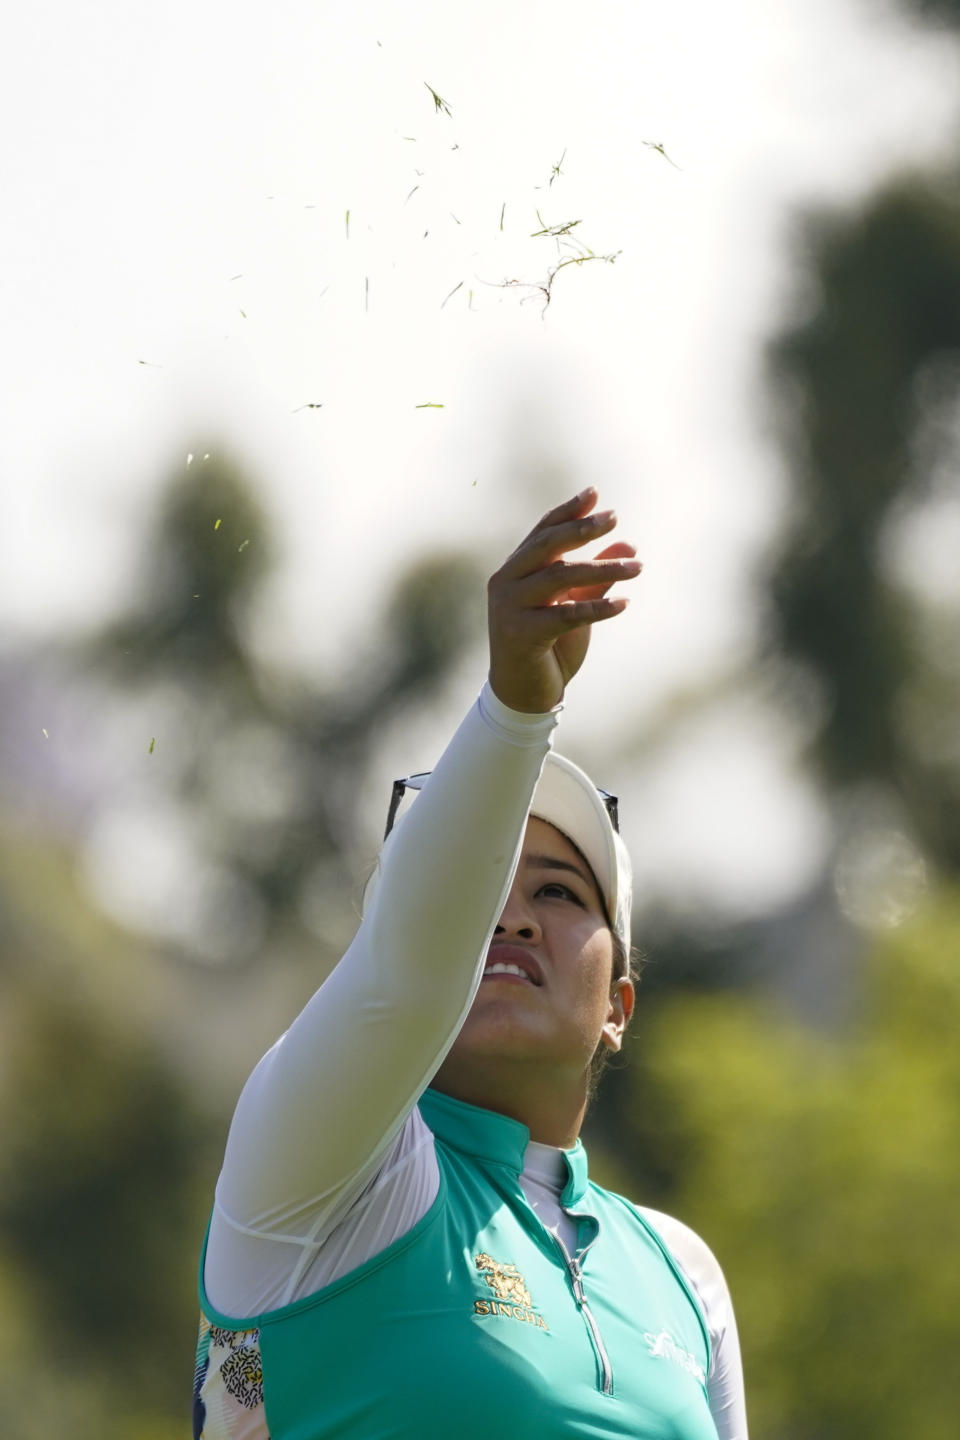 Jasmine Suwannapura throws grass in the air at the 17th tee during the final round of the LPGA's Palos Verdes Championship golf tournament on Sunday, May 1, 2022, in Palos Verdes Estates, Calif. (AP Photo/Ashley Landis)